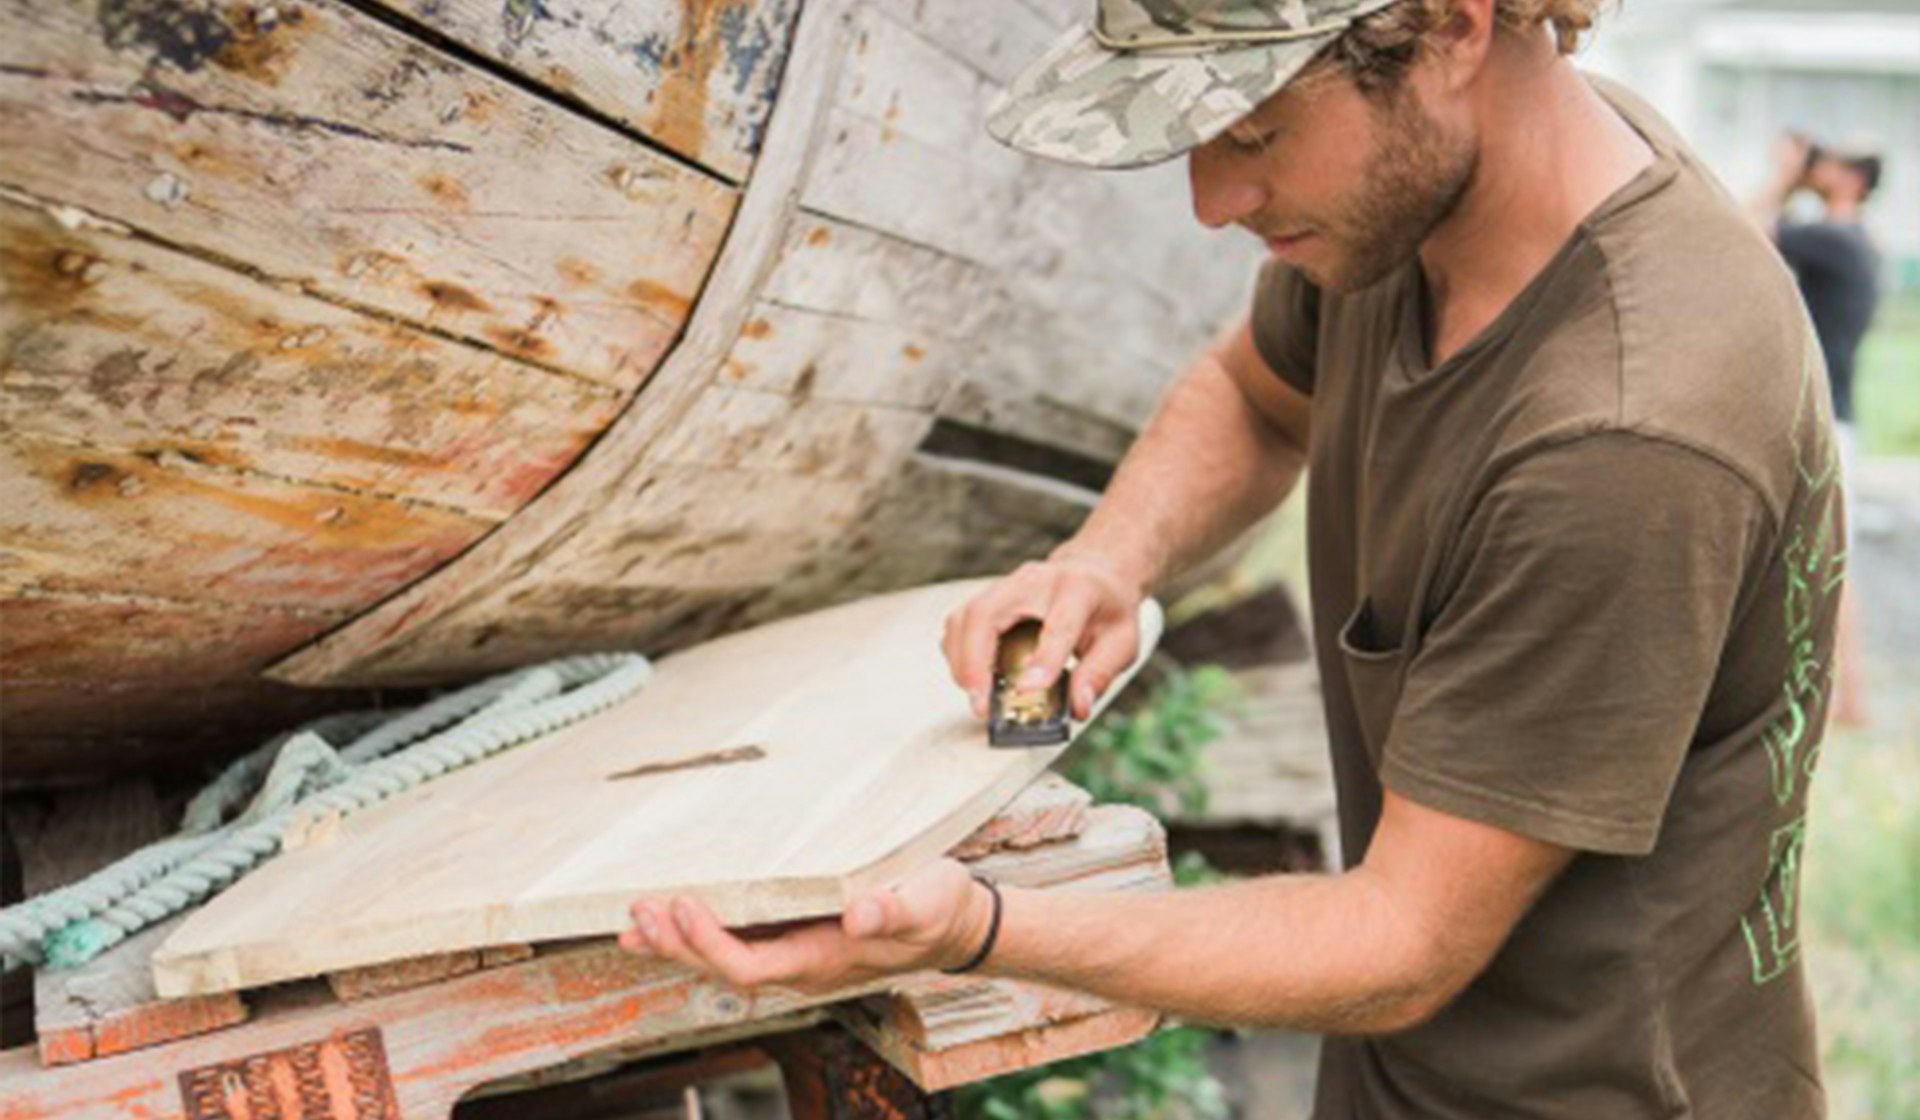 Go on a Nova Scotia surfing and shaping odyssey with Grain Surfboards